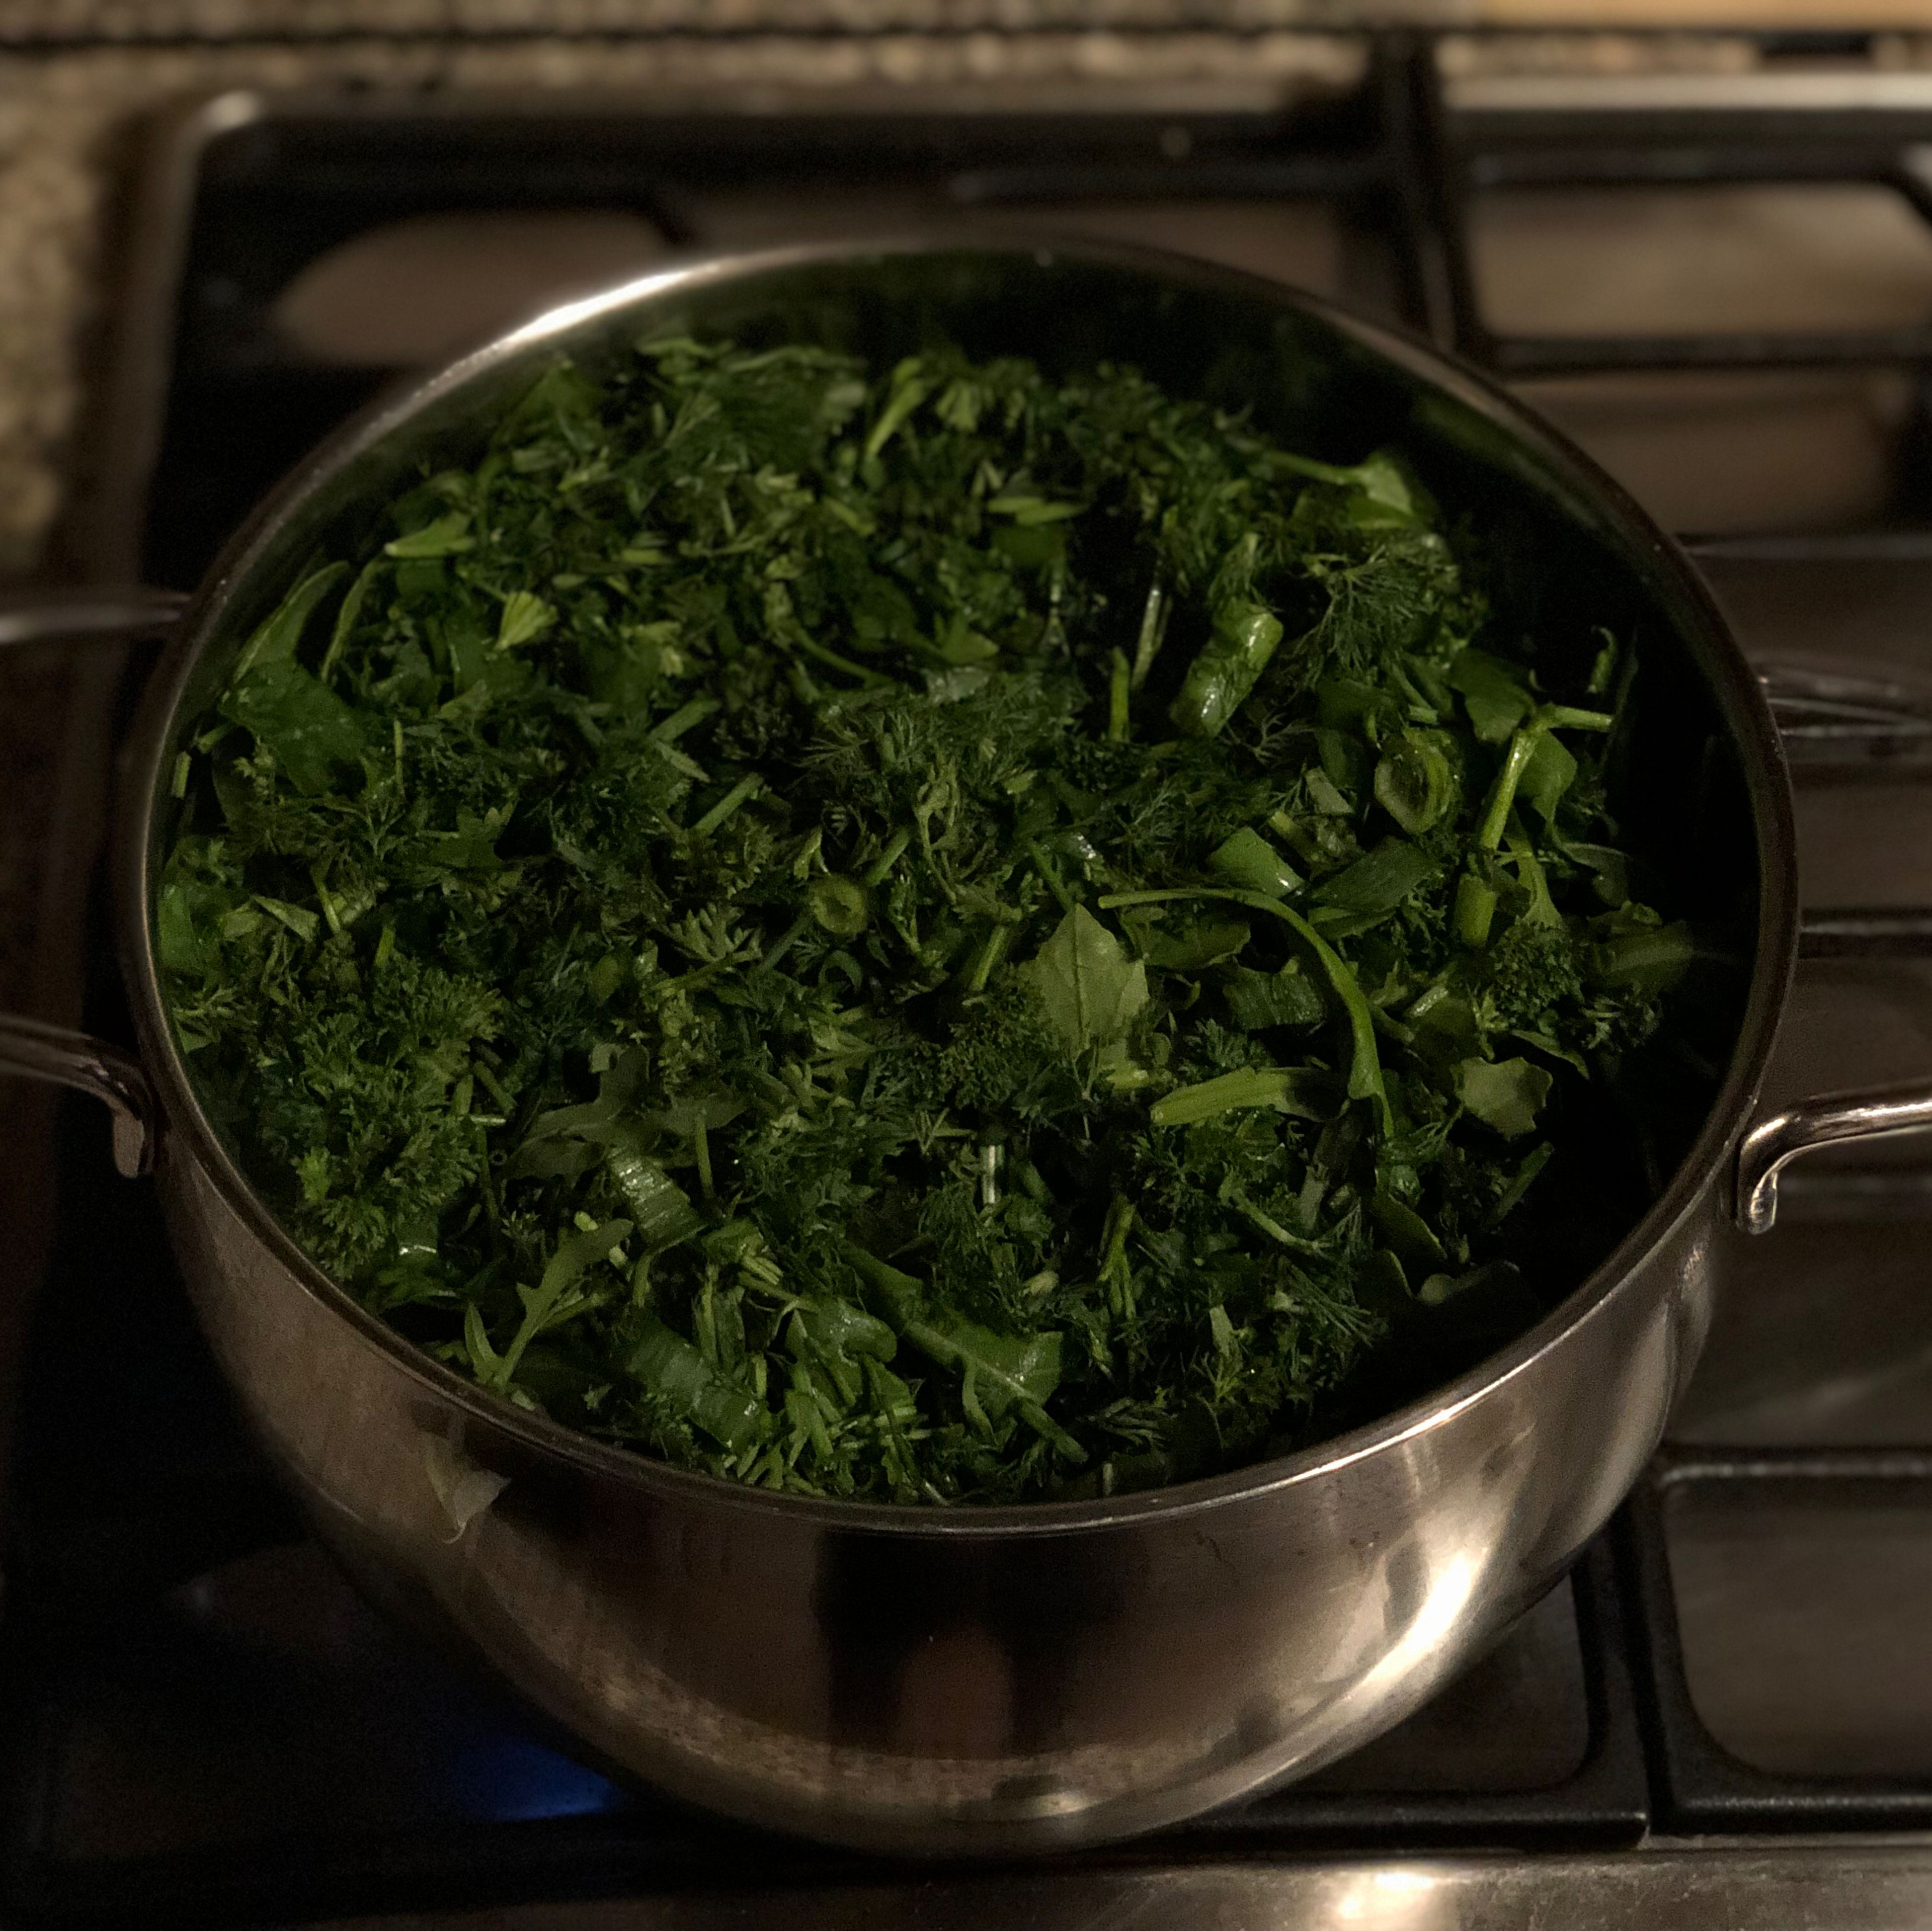 Chop spinach, arugula, dill, tarragon, parsley , springs onion and cilantro. Combine in a stockpot with the olive oil and cook in a low heat until smooth. 15-20 minutes. Season with salt and pepper and set aside to cool.